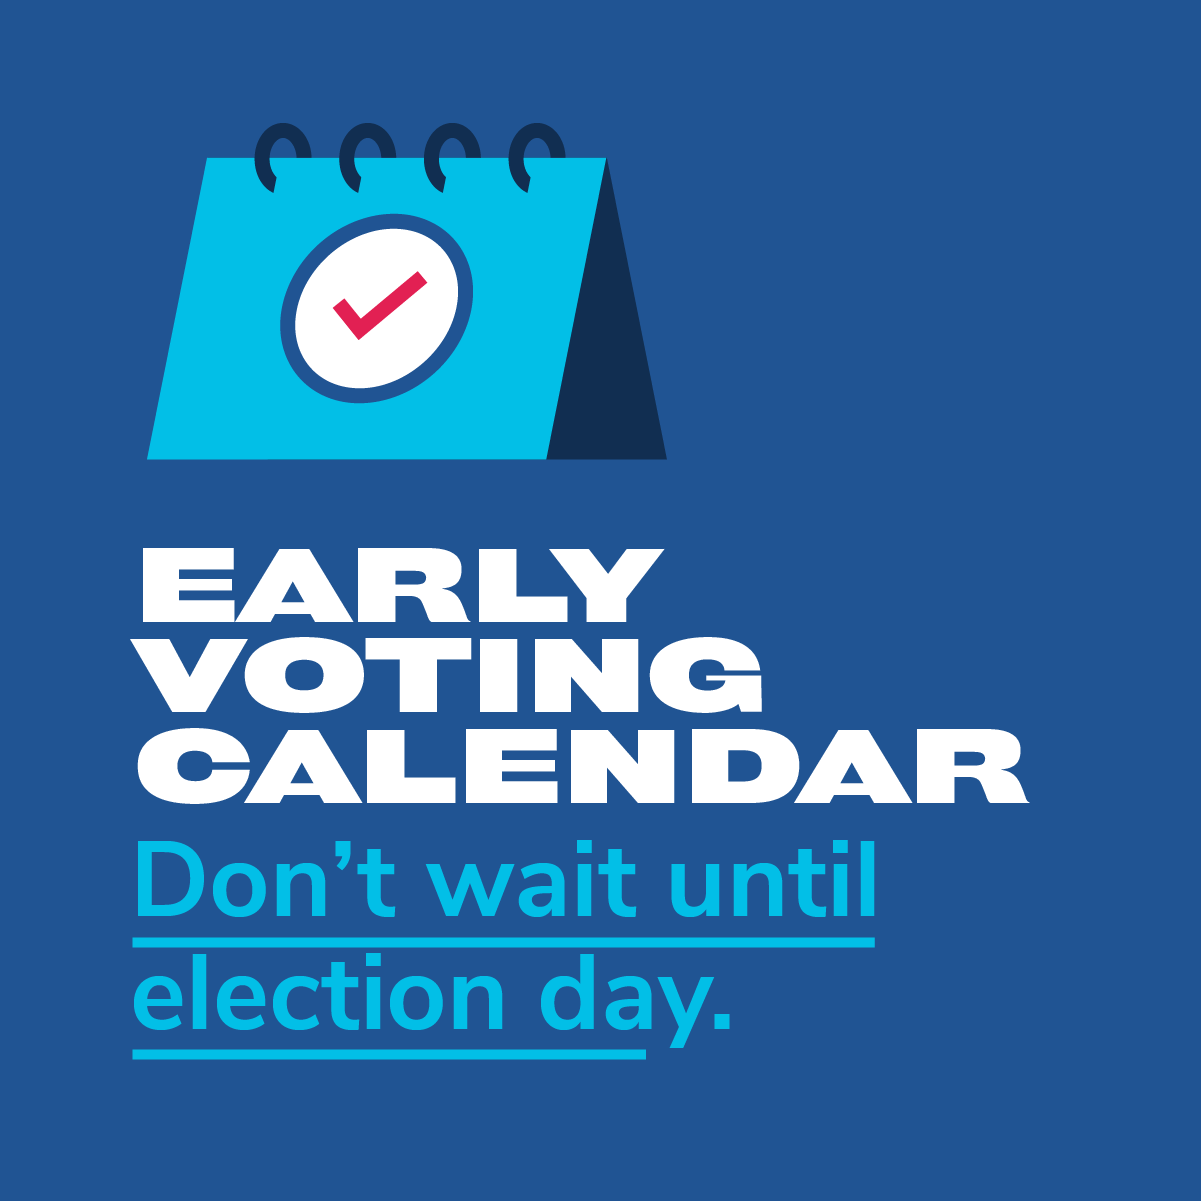 Town of Hull: EARLY VOTING SCHEDULE